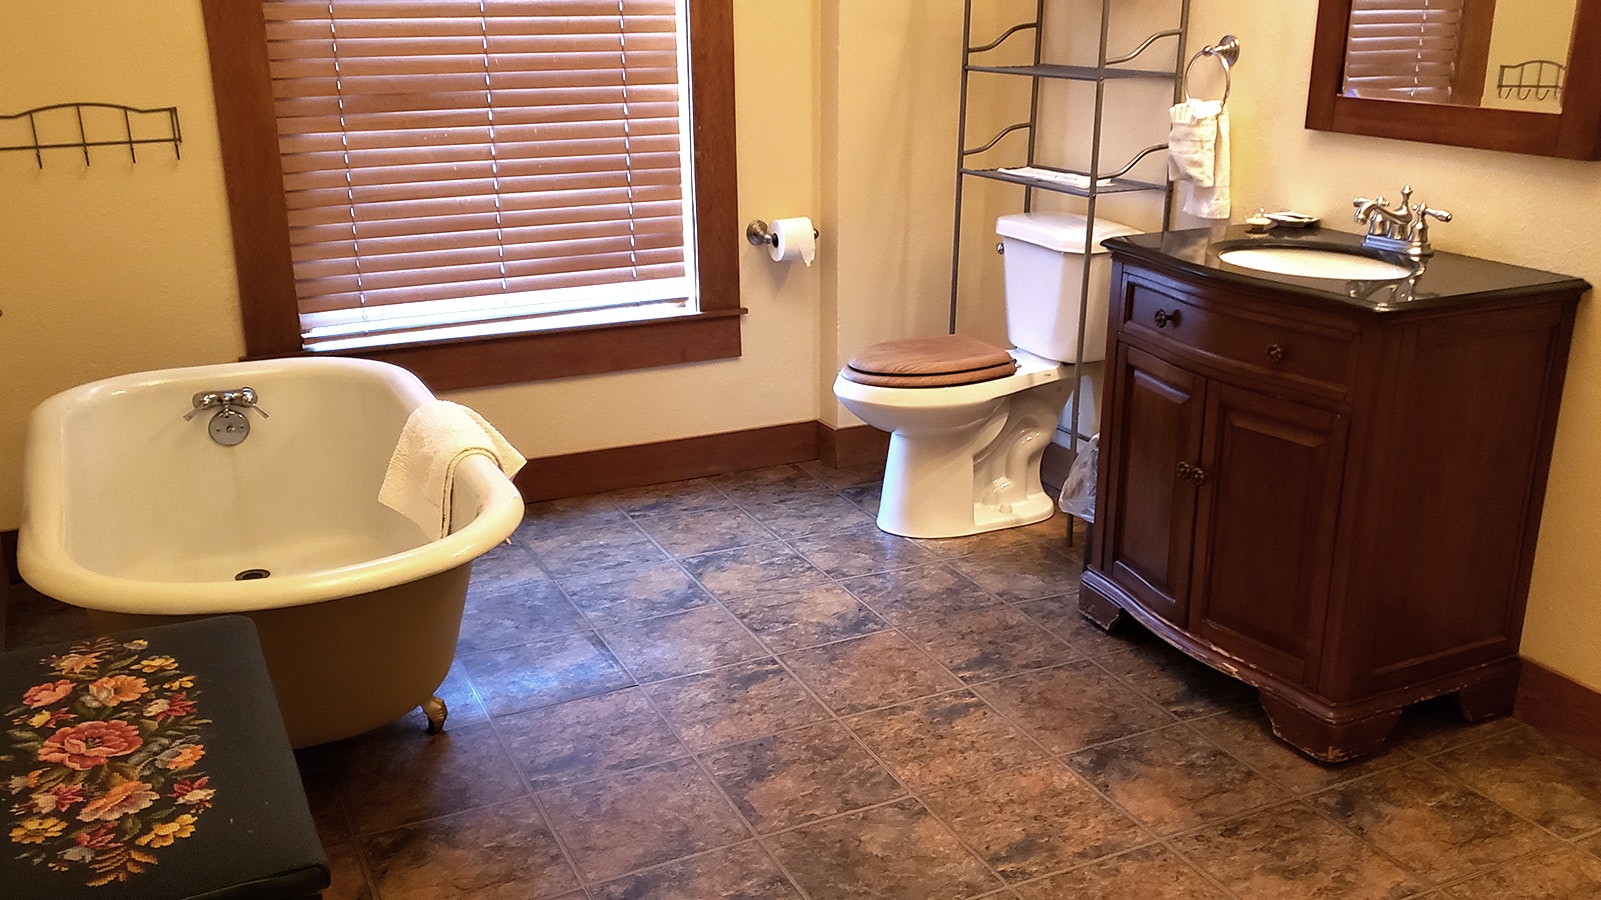 An old fashioned clawfoot tub awaits in a spacious bathroom in the Cloud Peak Suite.